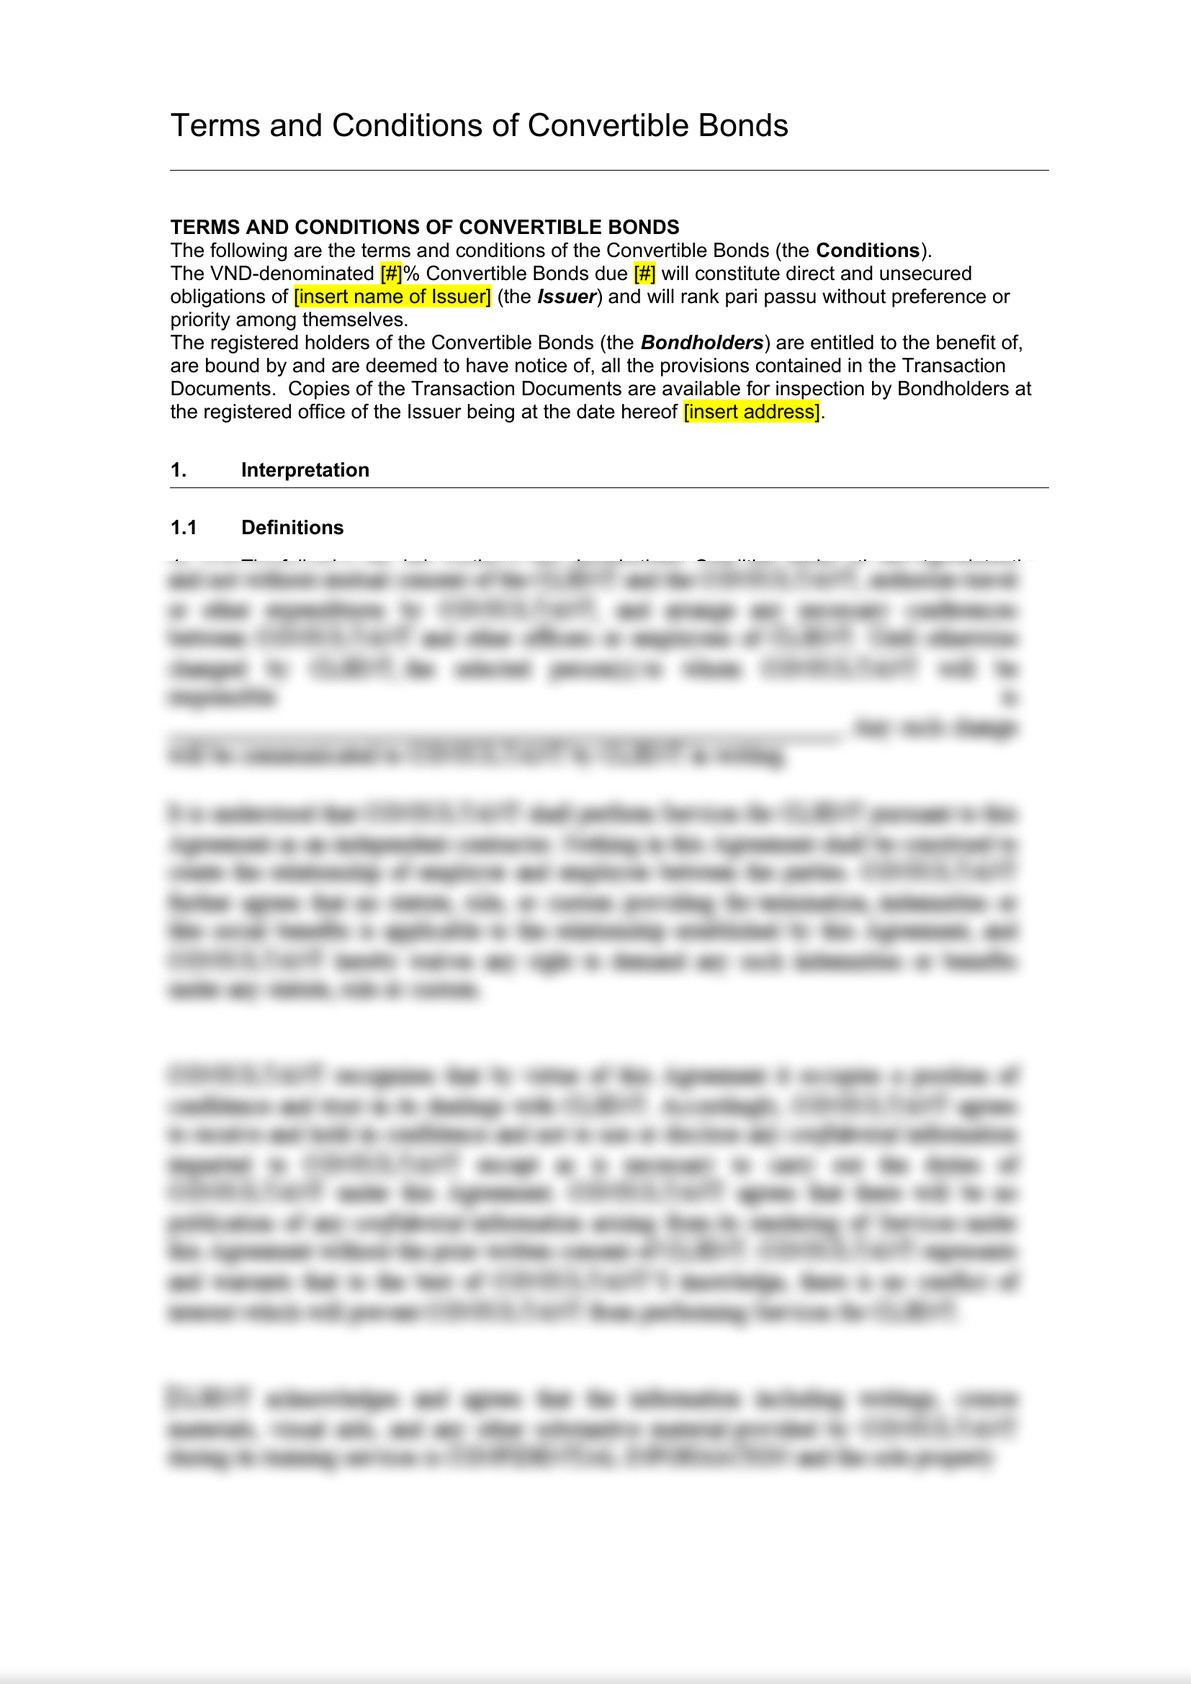 Terms and Conditions of Convertible Bonds-1